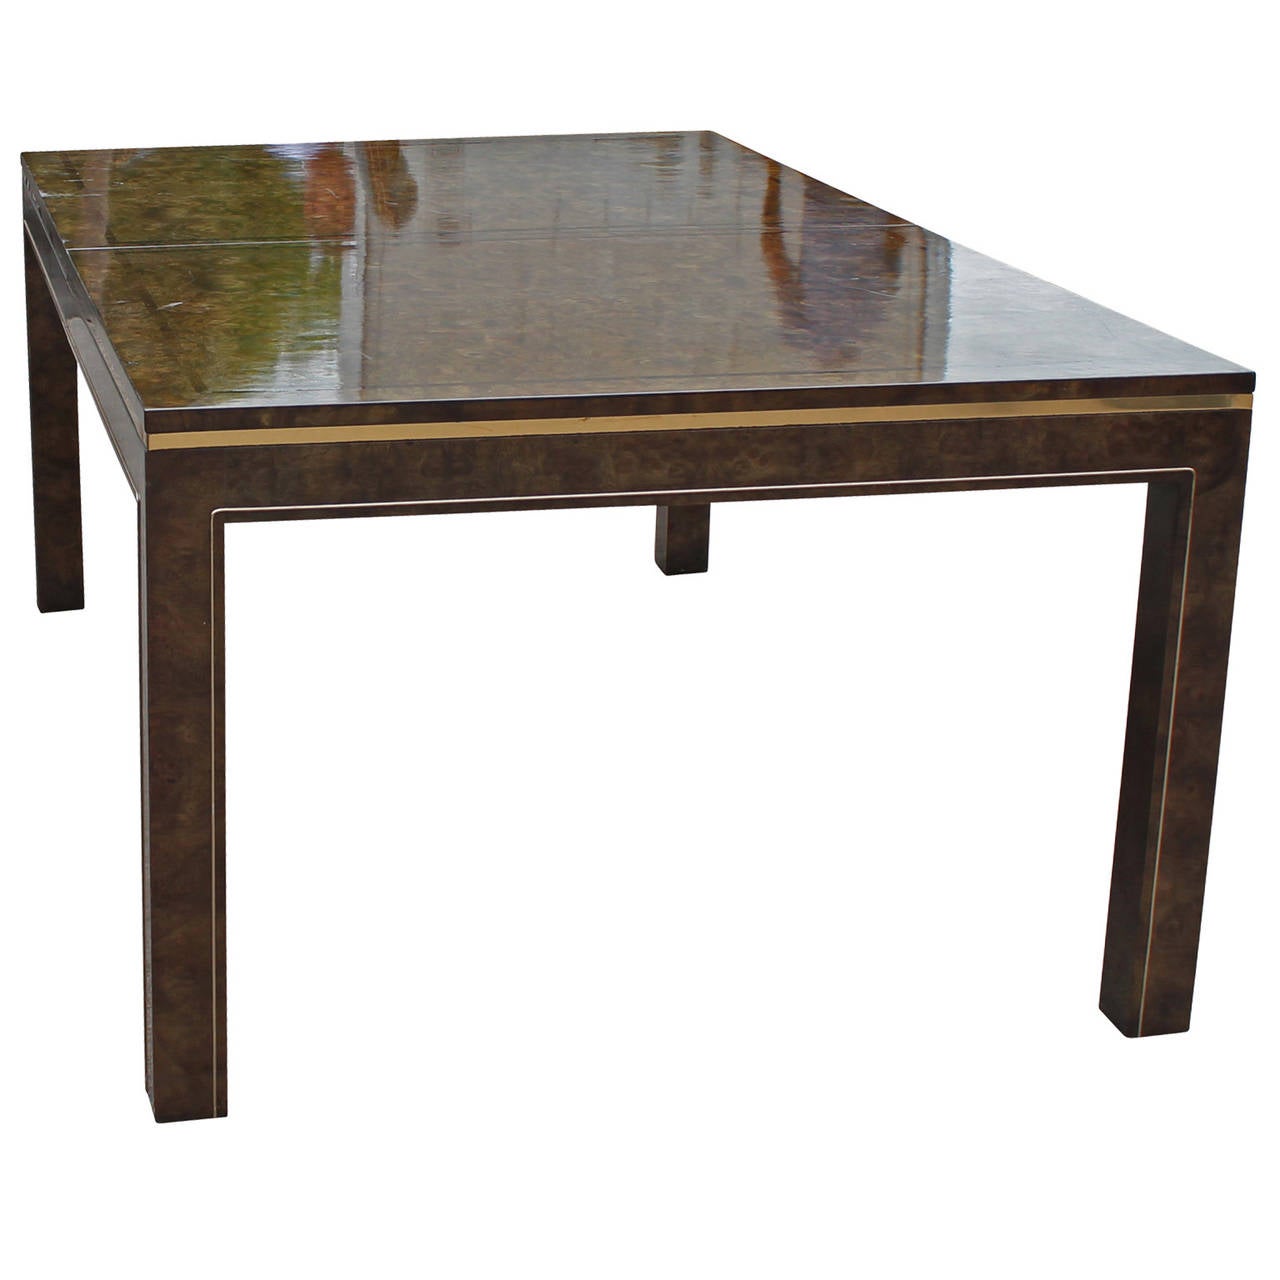 Mastercraft parsons style dining table in burl Amboyna wood with an inlaid rosewood border and brass accents. Table has a high gloss finish. A brass band wraps around the table top while another brass detail highlights the clean lined legs. Matching